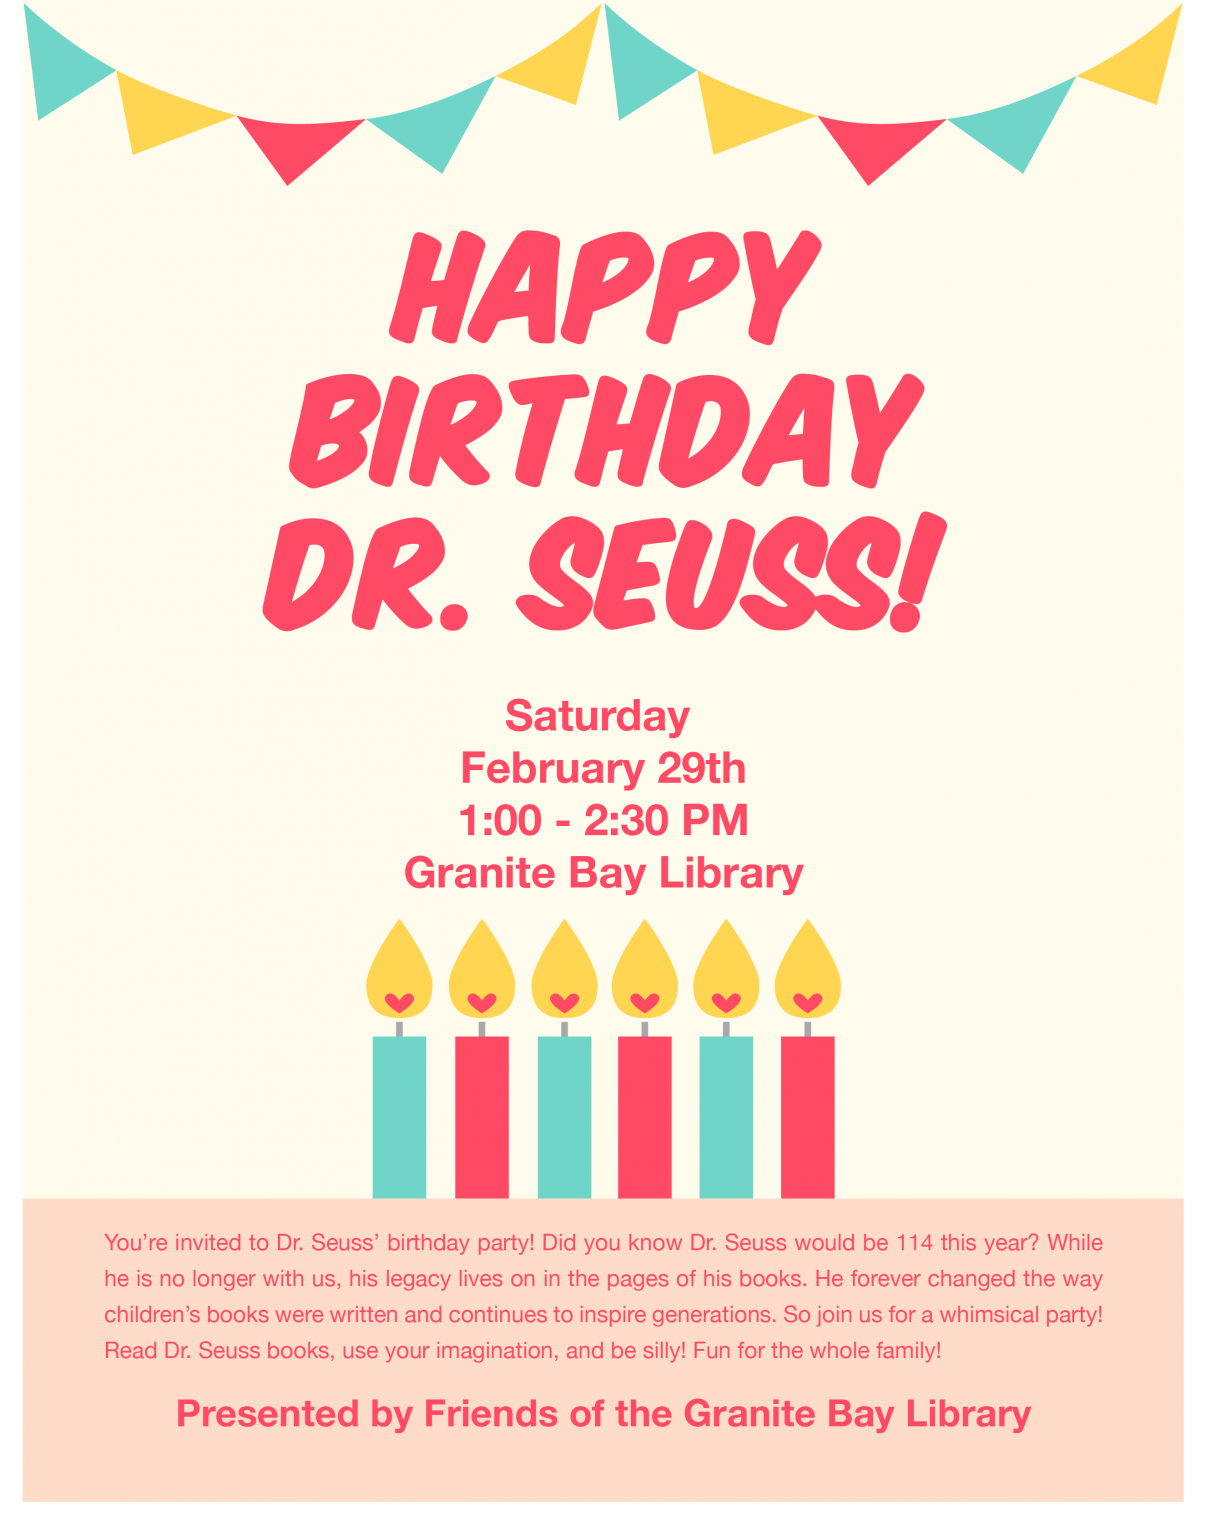 Dr. Seuss' Birthday Party Sat, Feb 29th, 2020 Friends of the